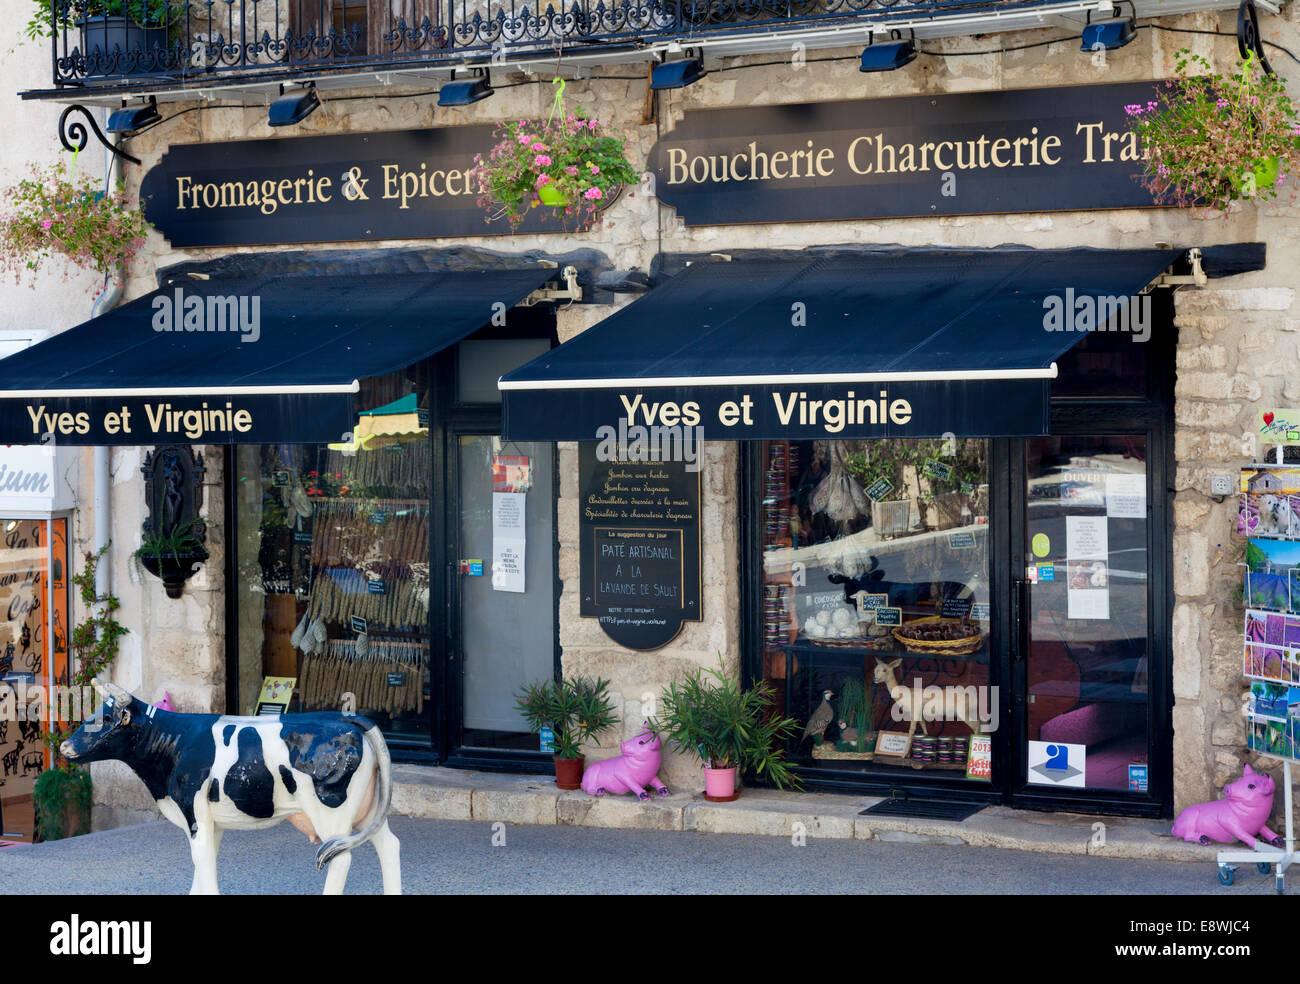 Butcher - boucherie and charcuterie shop in Sault, Vaucluse, Provence, France. Stock Photo